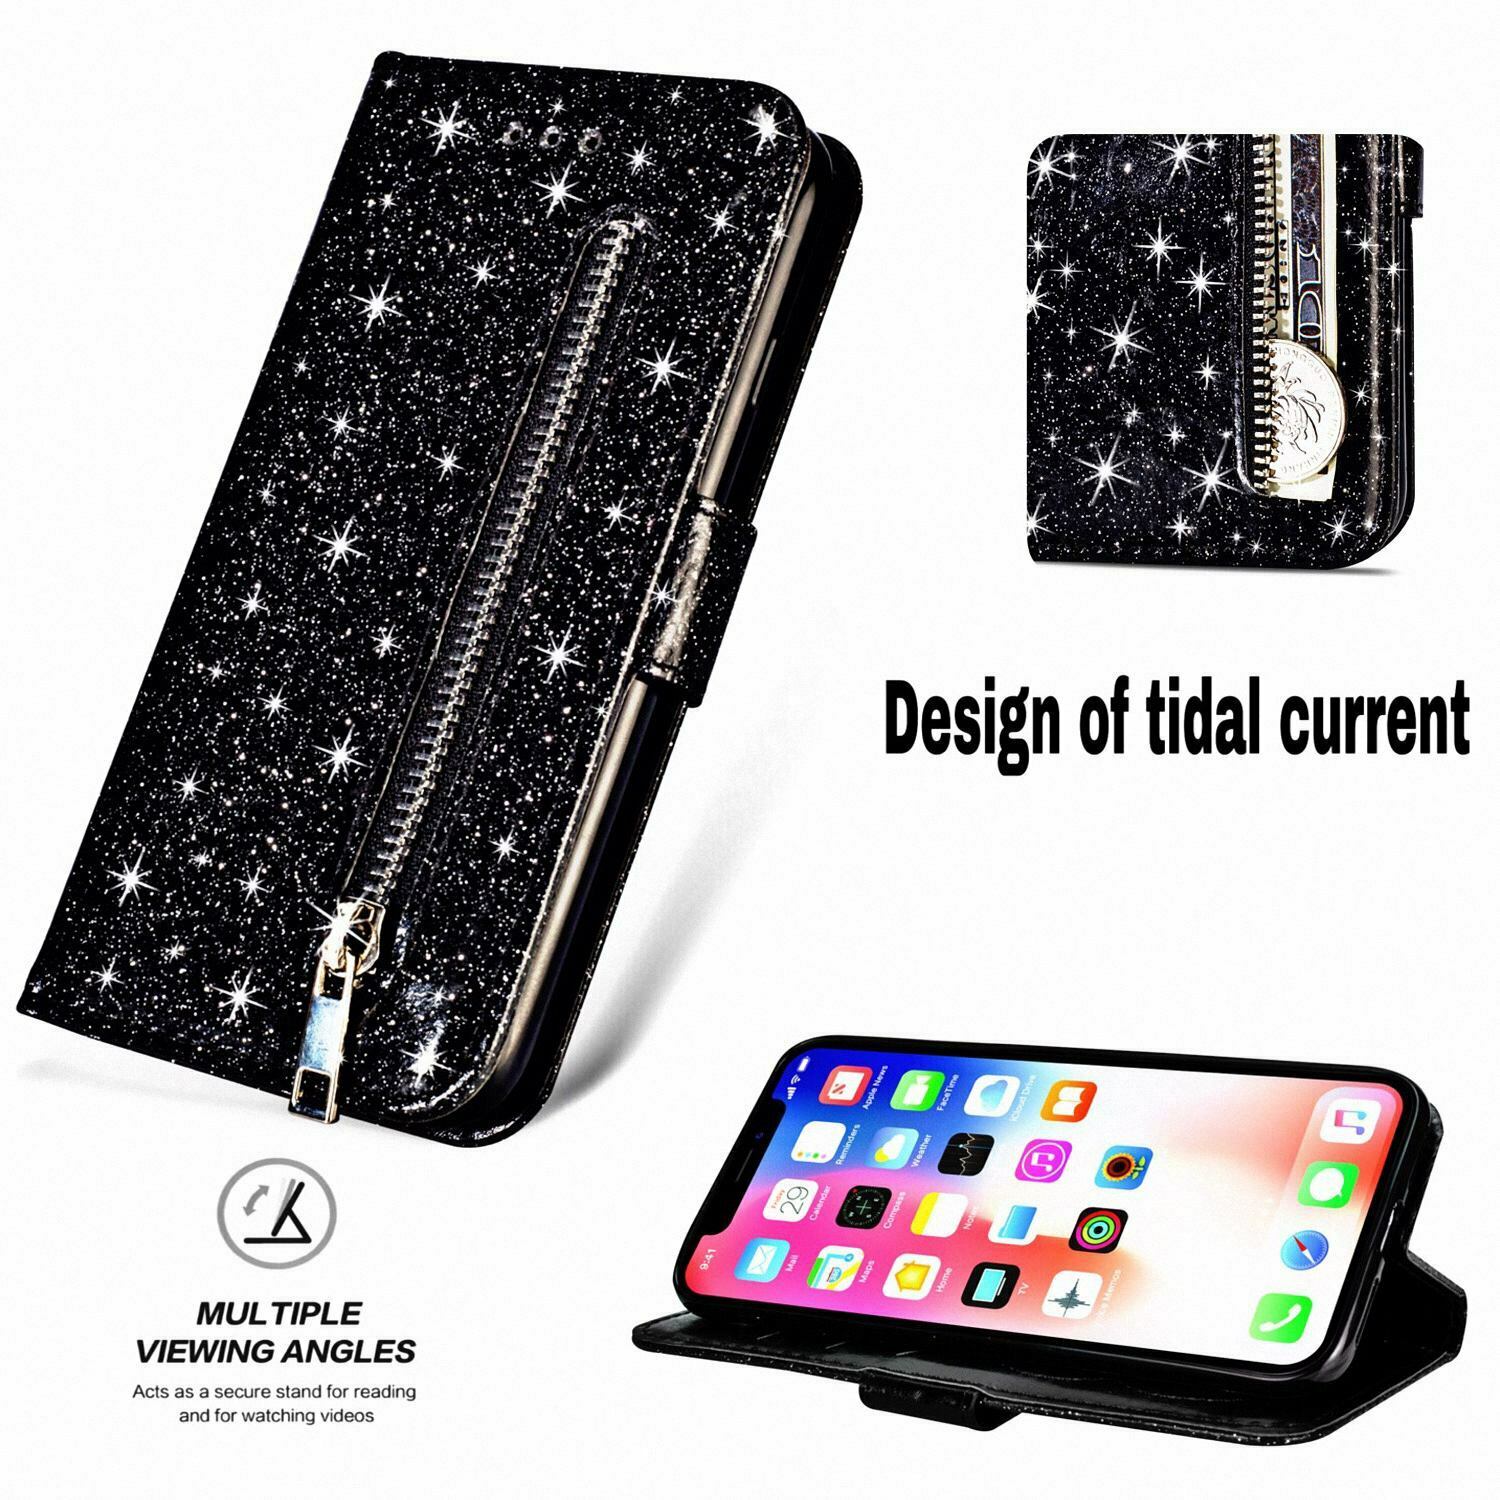 Glitter Bling Leather Zipper Wallet Case For iPhone - carolay.co